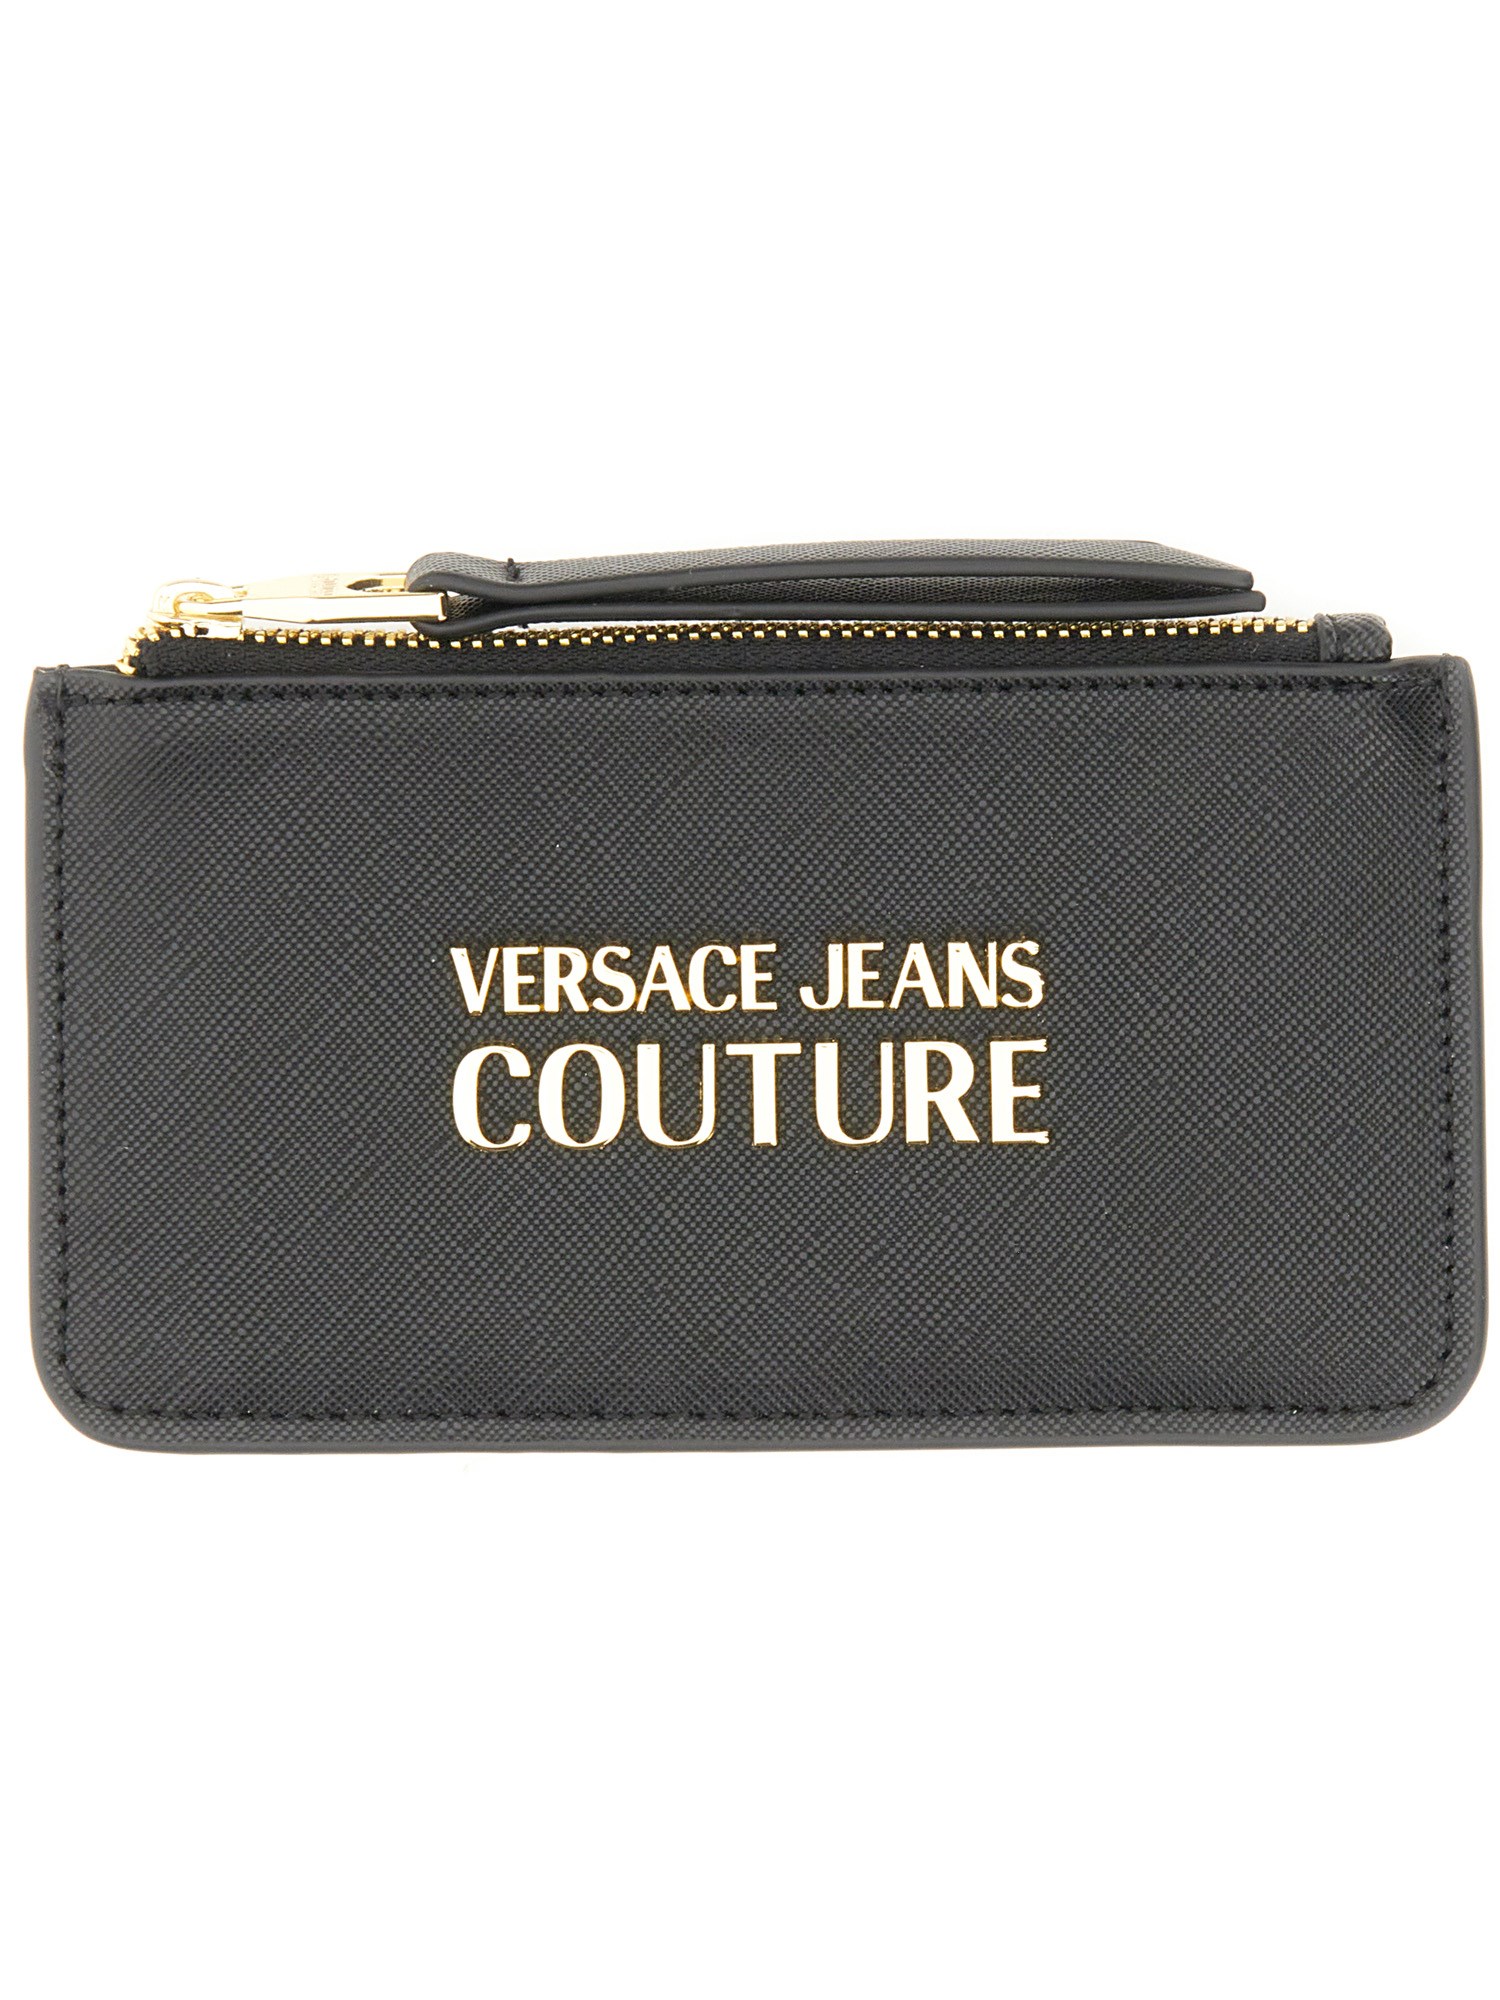 Versace Jeans Couture Zippered Card Holder In Black | ModeSens